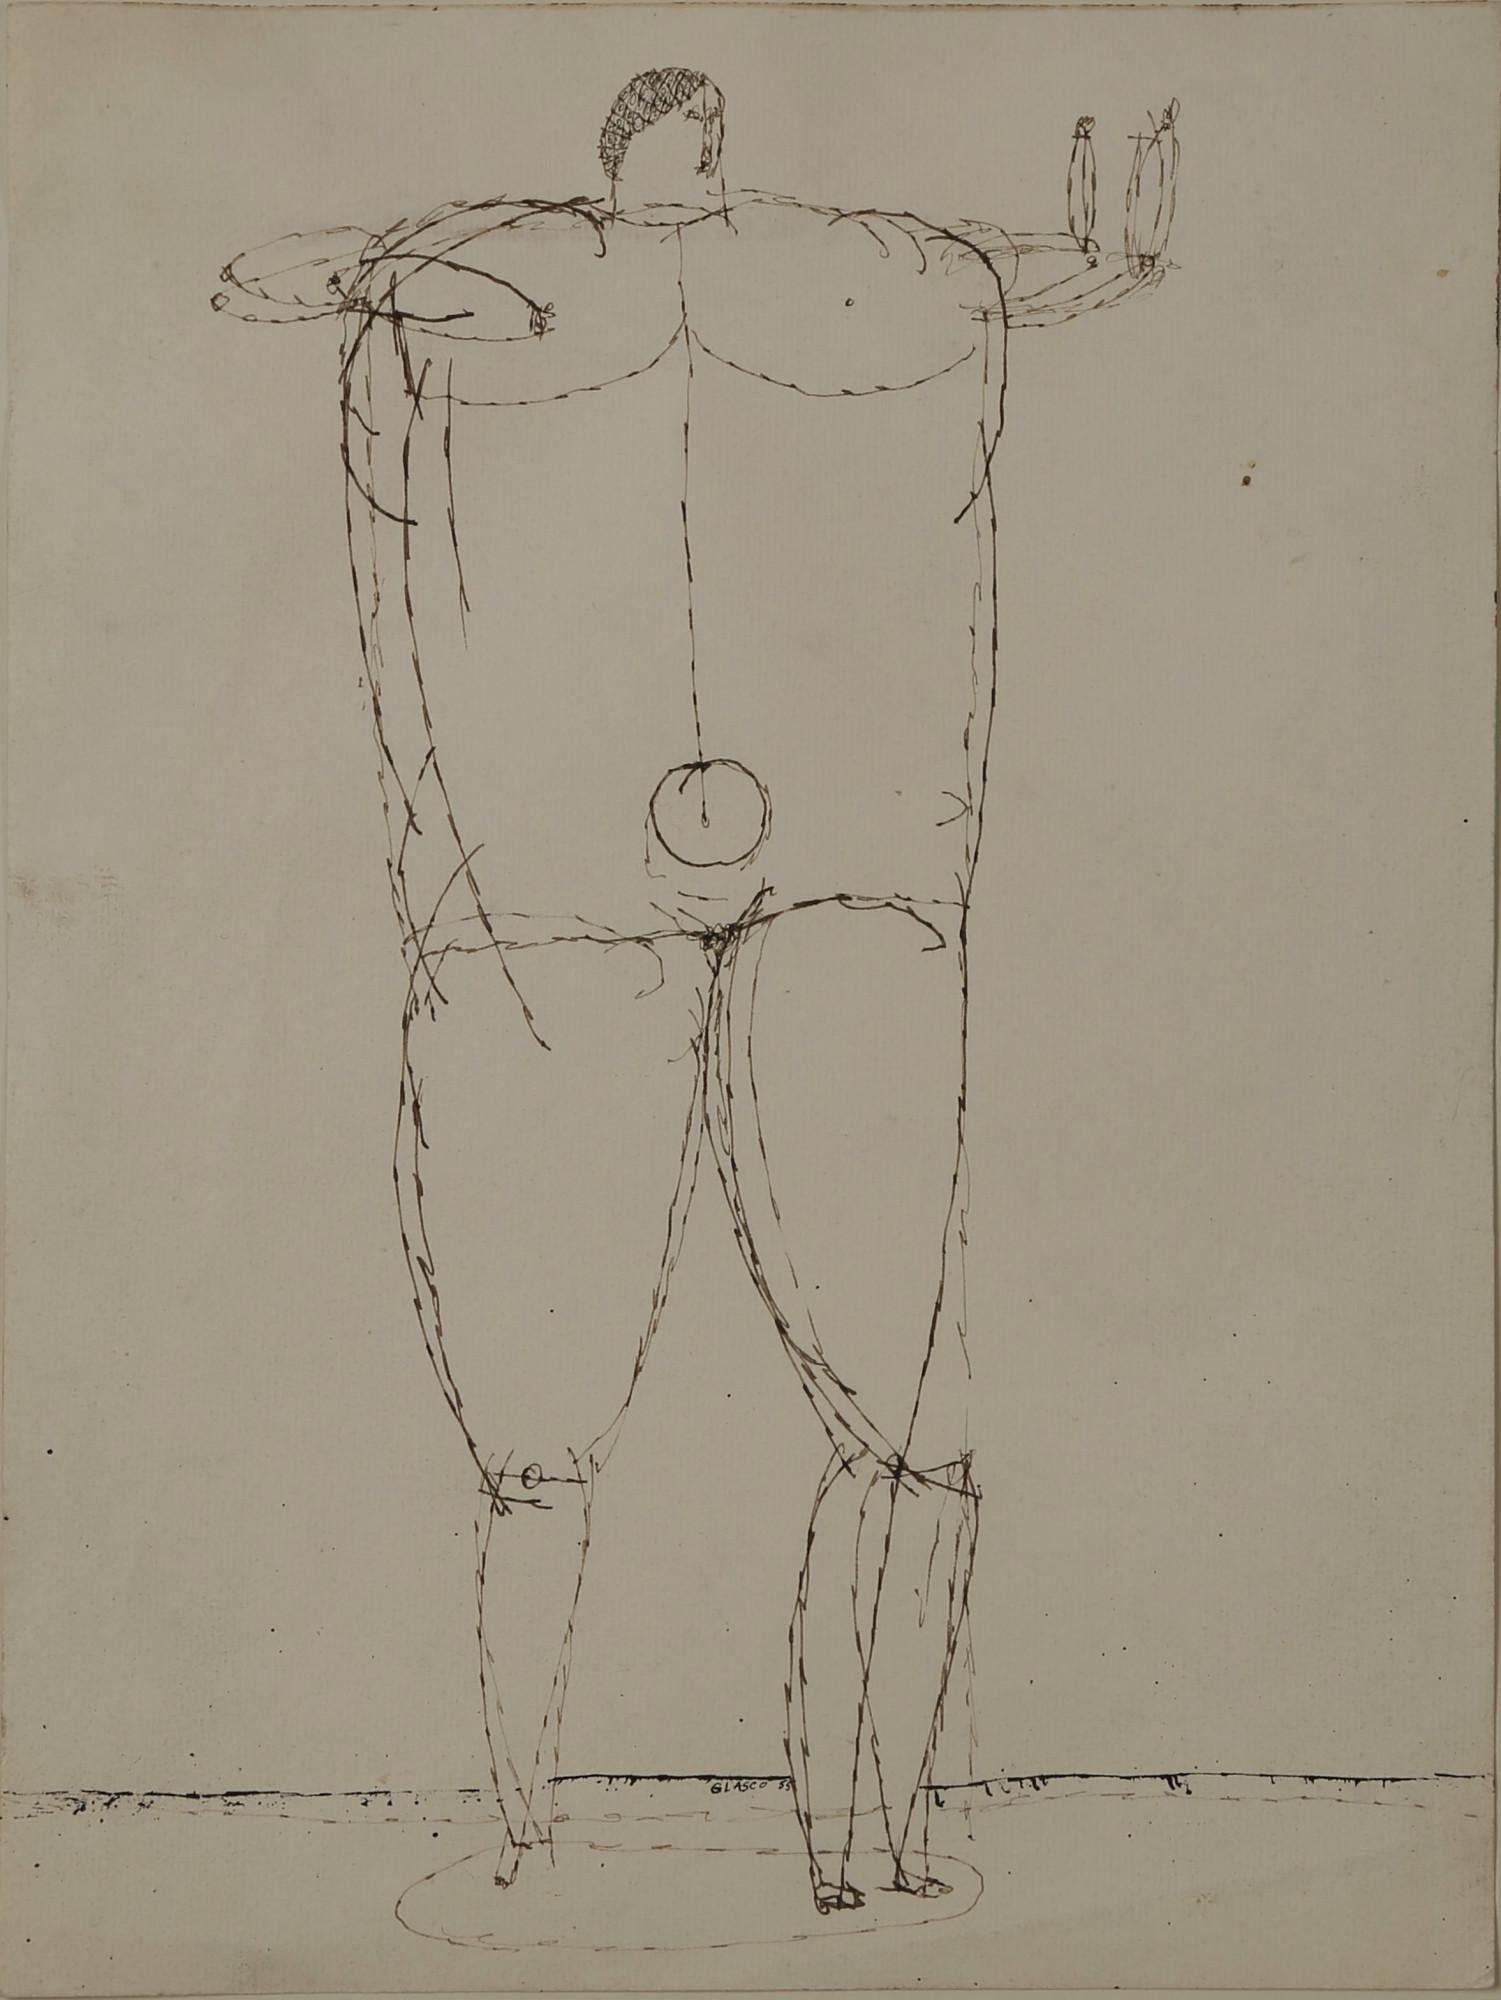 Joseph Glasco Figurative Art - Standing Figure, figural abstract expressionist ink drawing, 20th century